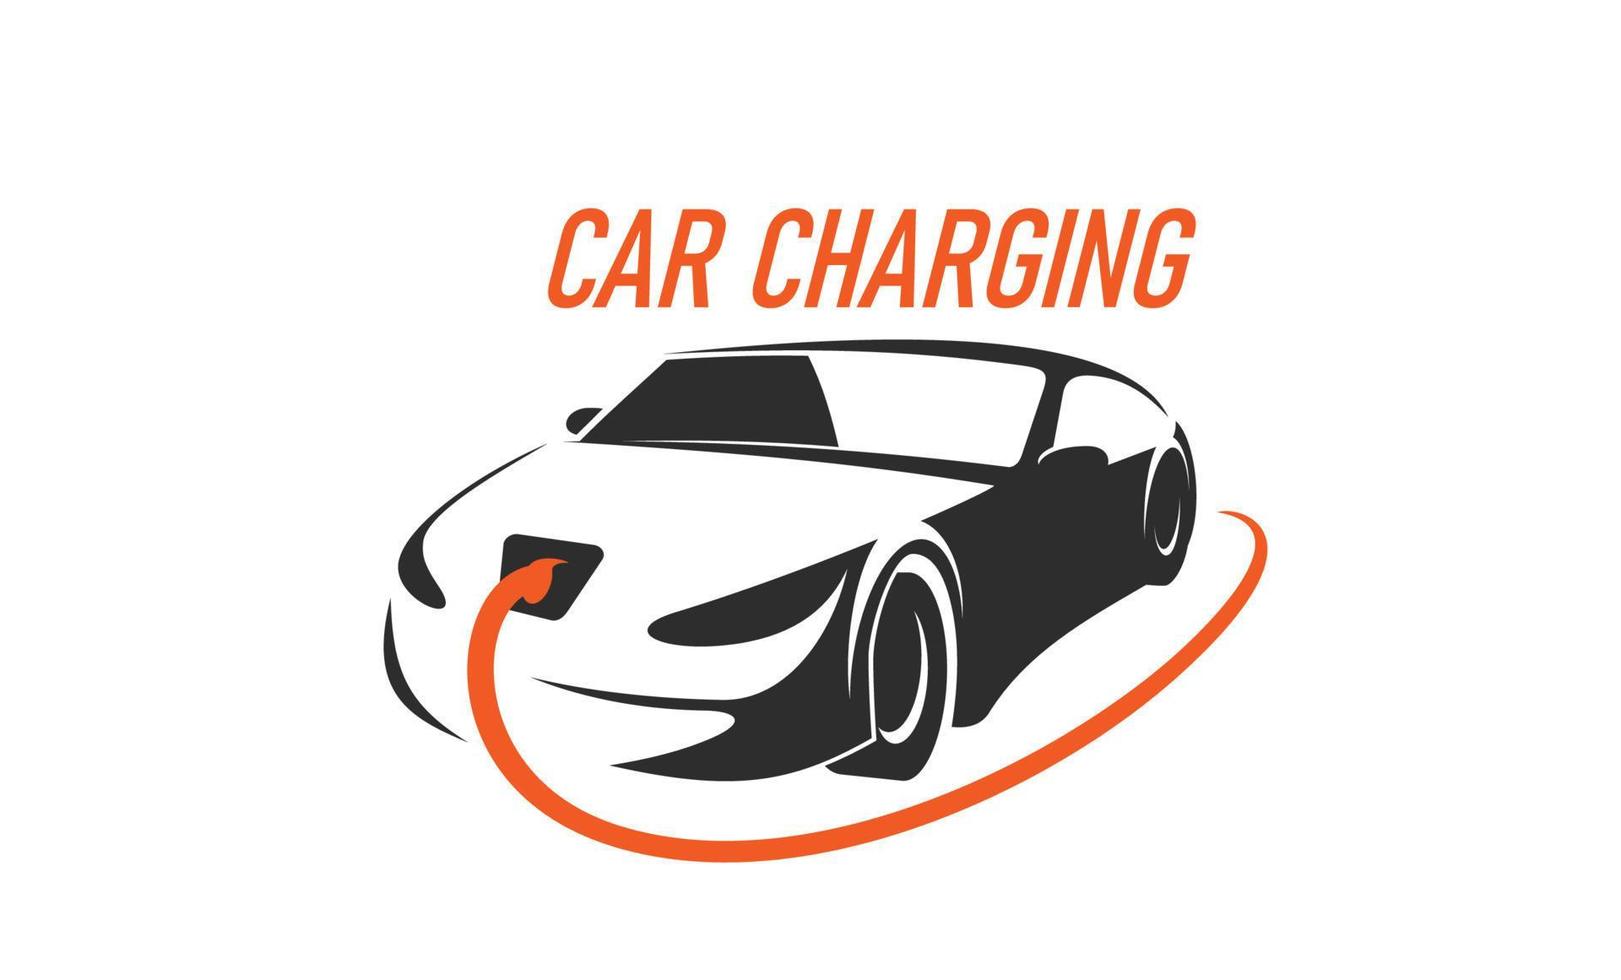 Electric car charge service station icon or symbol vector